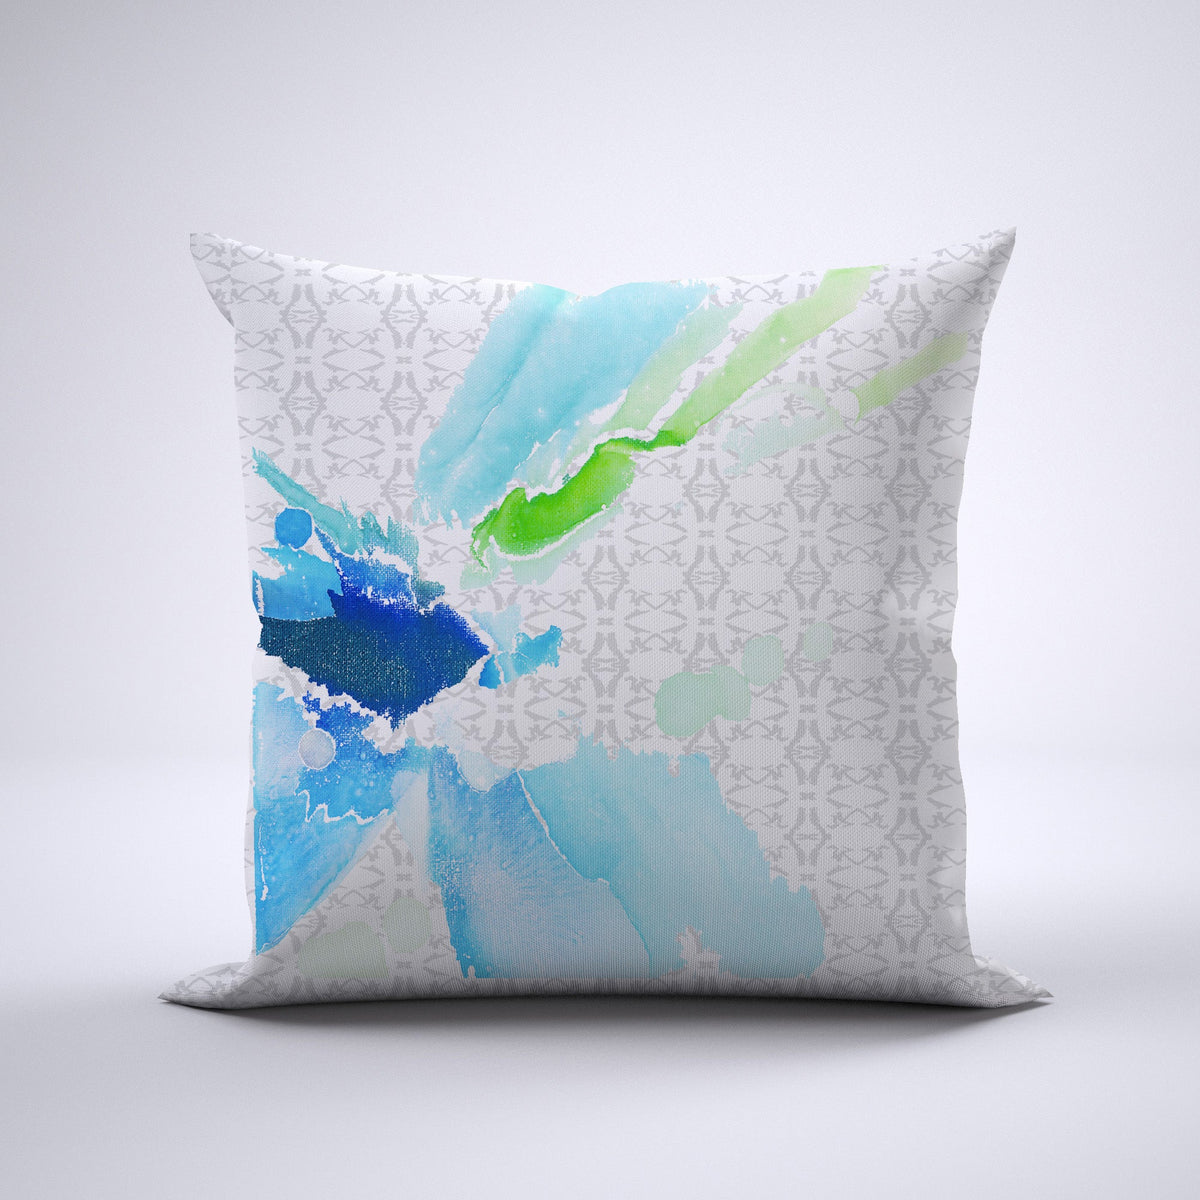 Throw Pillow - Painted Lady Blue Morpho Bedding Collections, Pillows, Throw Pillows MWW 